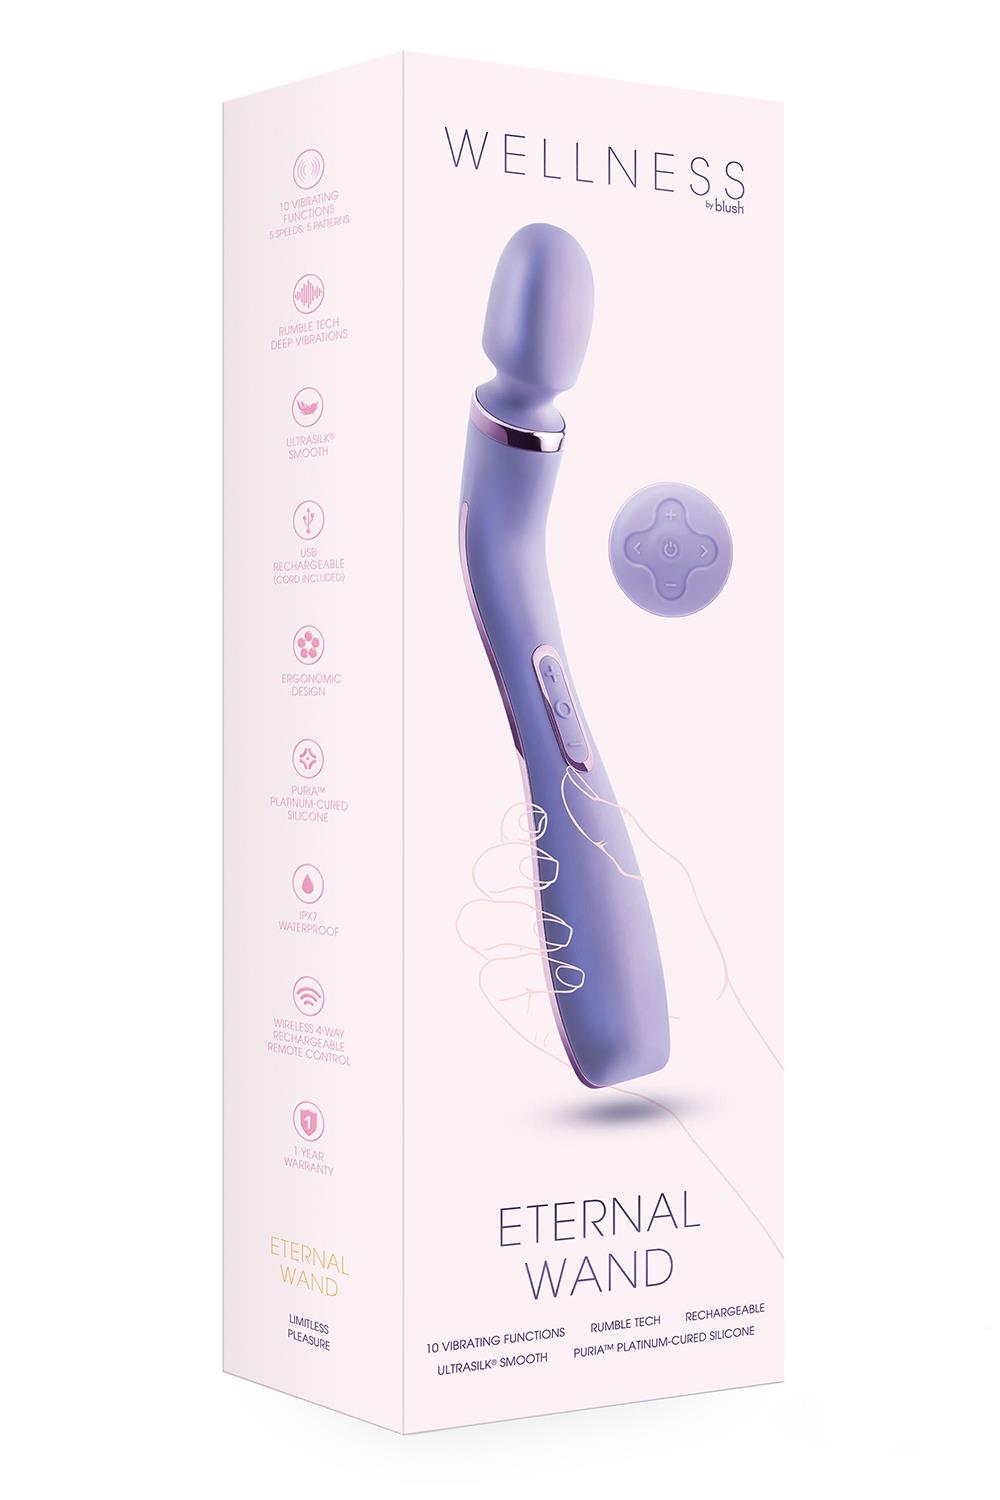 Blush Novelties Wellness Eternal Wand Rechargeable Silicone Vibrating Wand with Remote